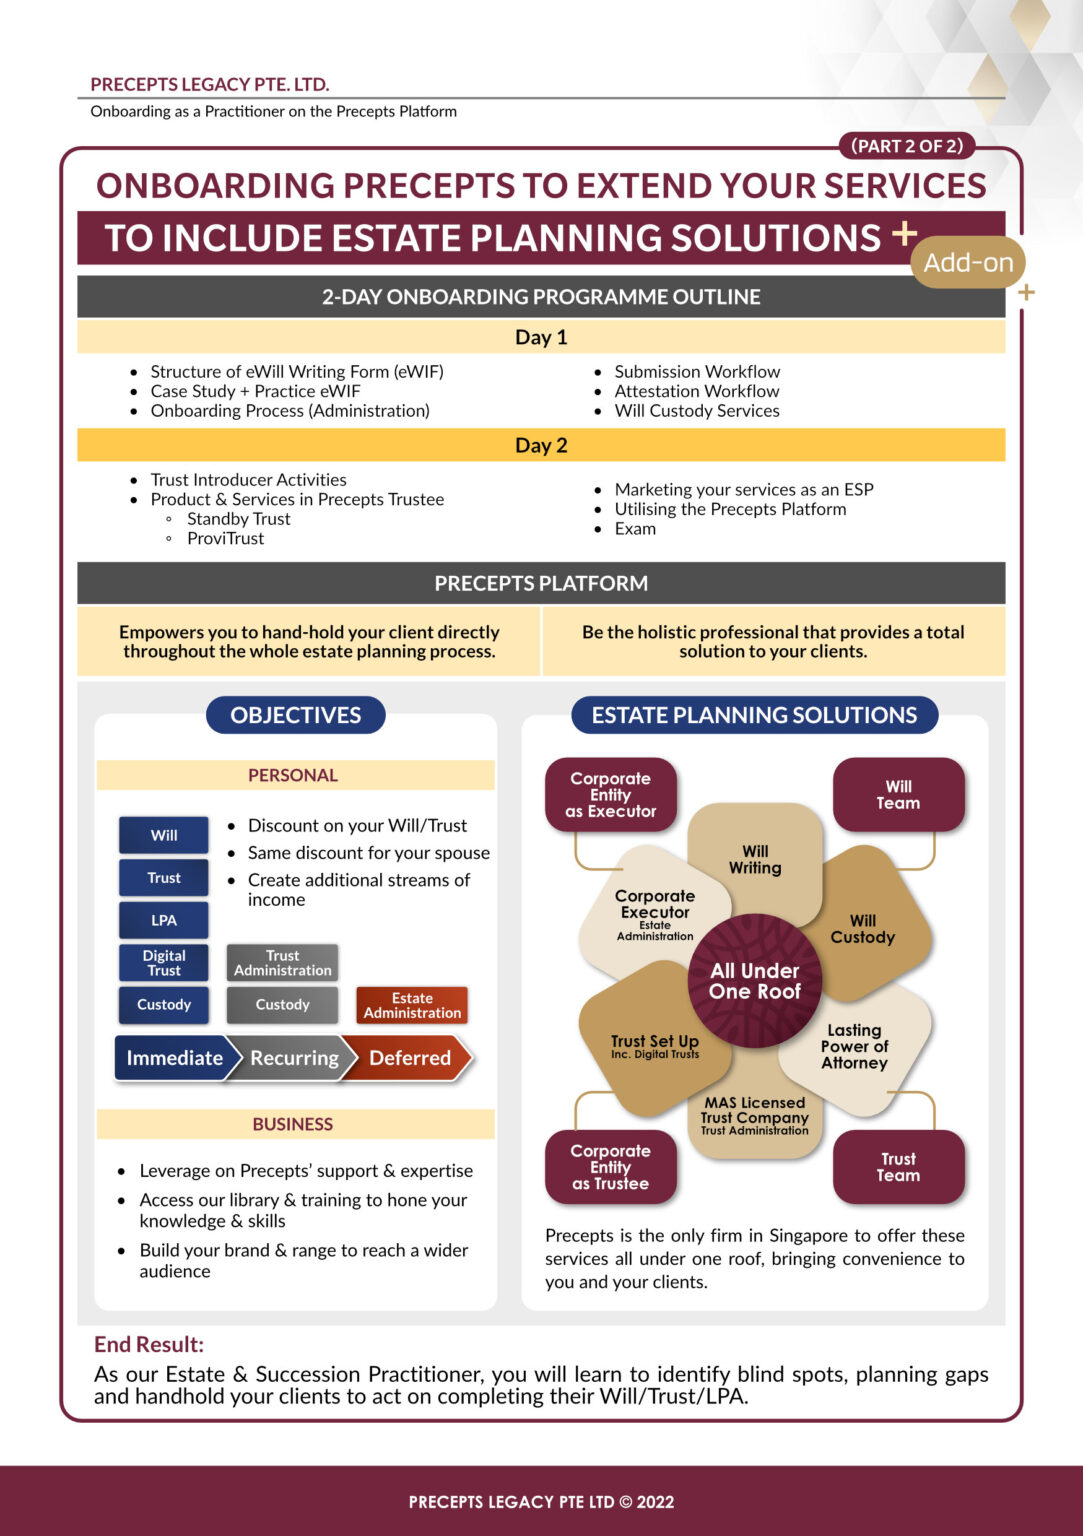 An image showing a flyer detailing a 2-day onboarding program for Precepts Legacy's estate planning services. It includes a timetable, objectives, platform features, and estate planning solutions.